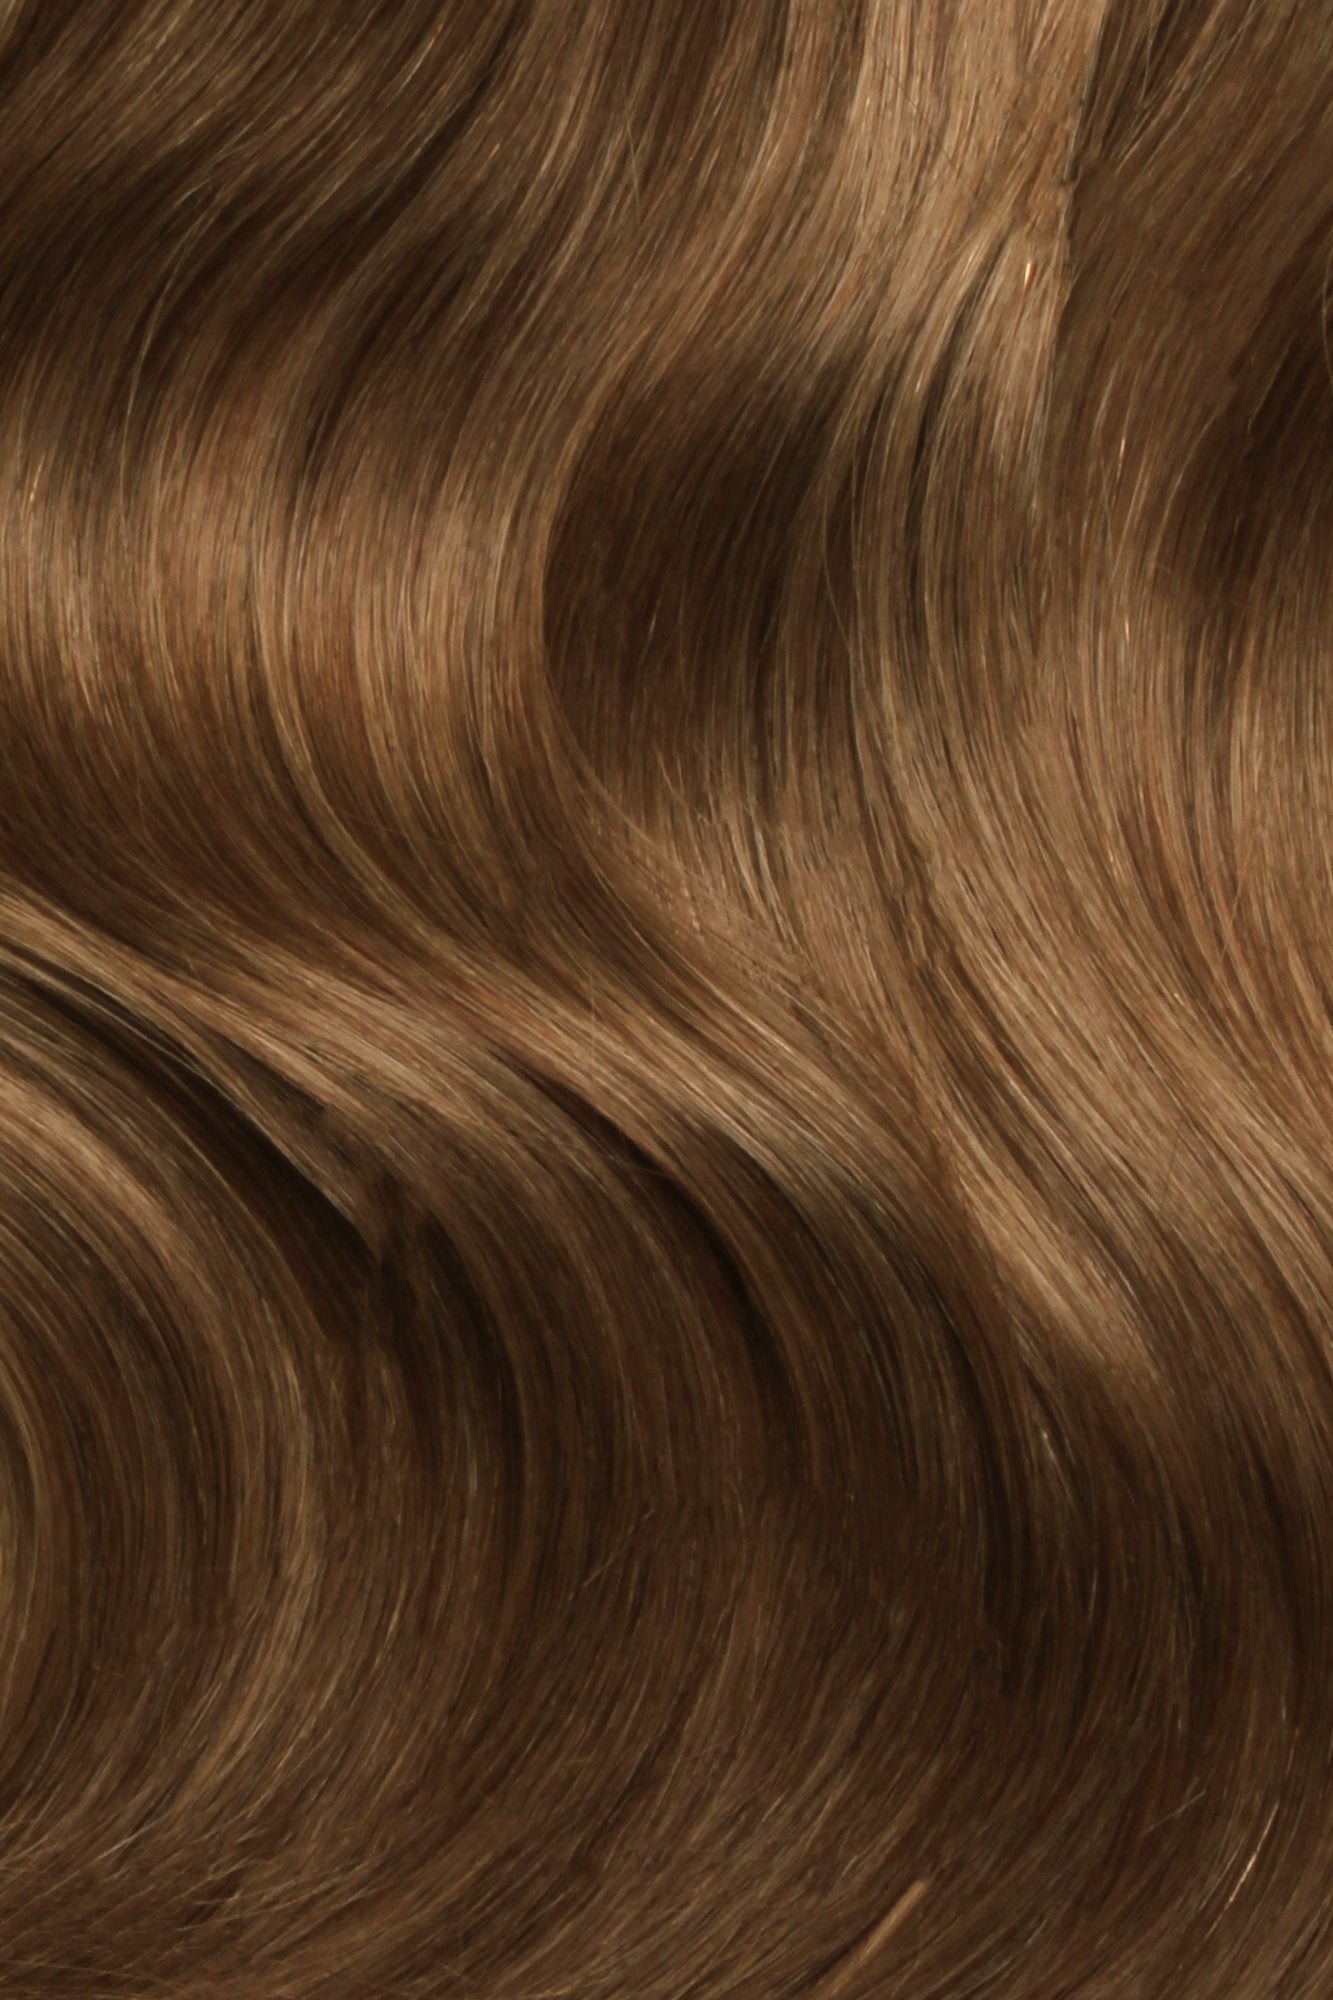 SEAMLESS® Flat Weft 18 Inches - SWAY Hair Extensions Chestnut-Brown-Mix-4-6 Natural SEAMLESS® Flat Weft 18 Inches extensions. Thin, flexible, and discreet. 100% Double Drawn Remy Human Hair. Versatile and reusable